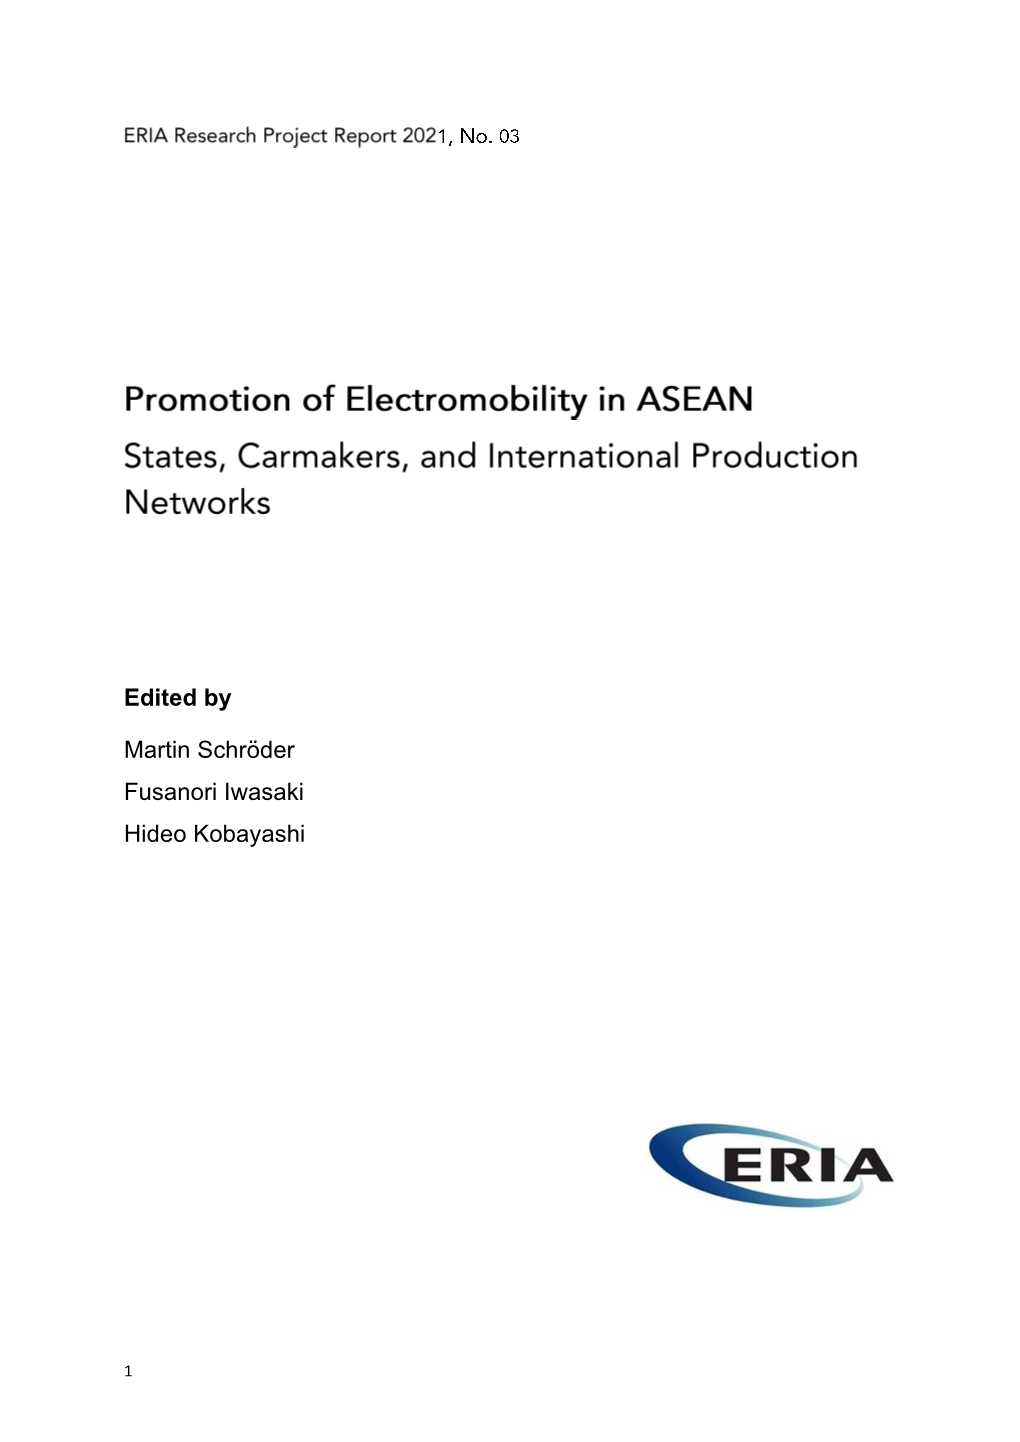 Promotion of Electromobility in ASEAN: States, Carmakers, and International Production Networks